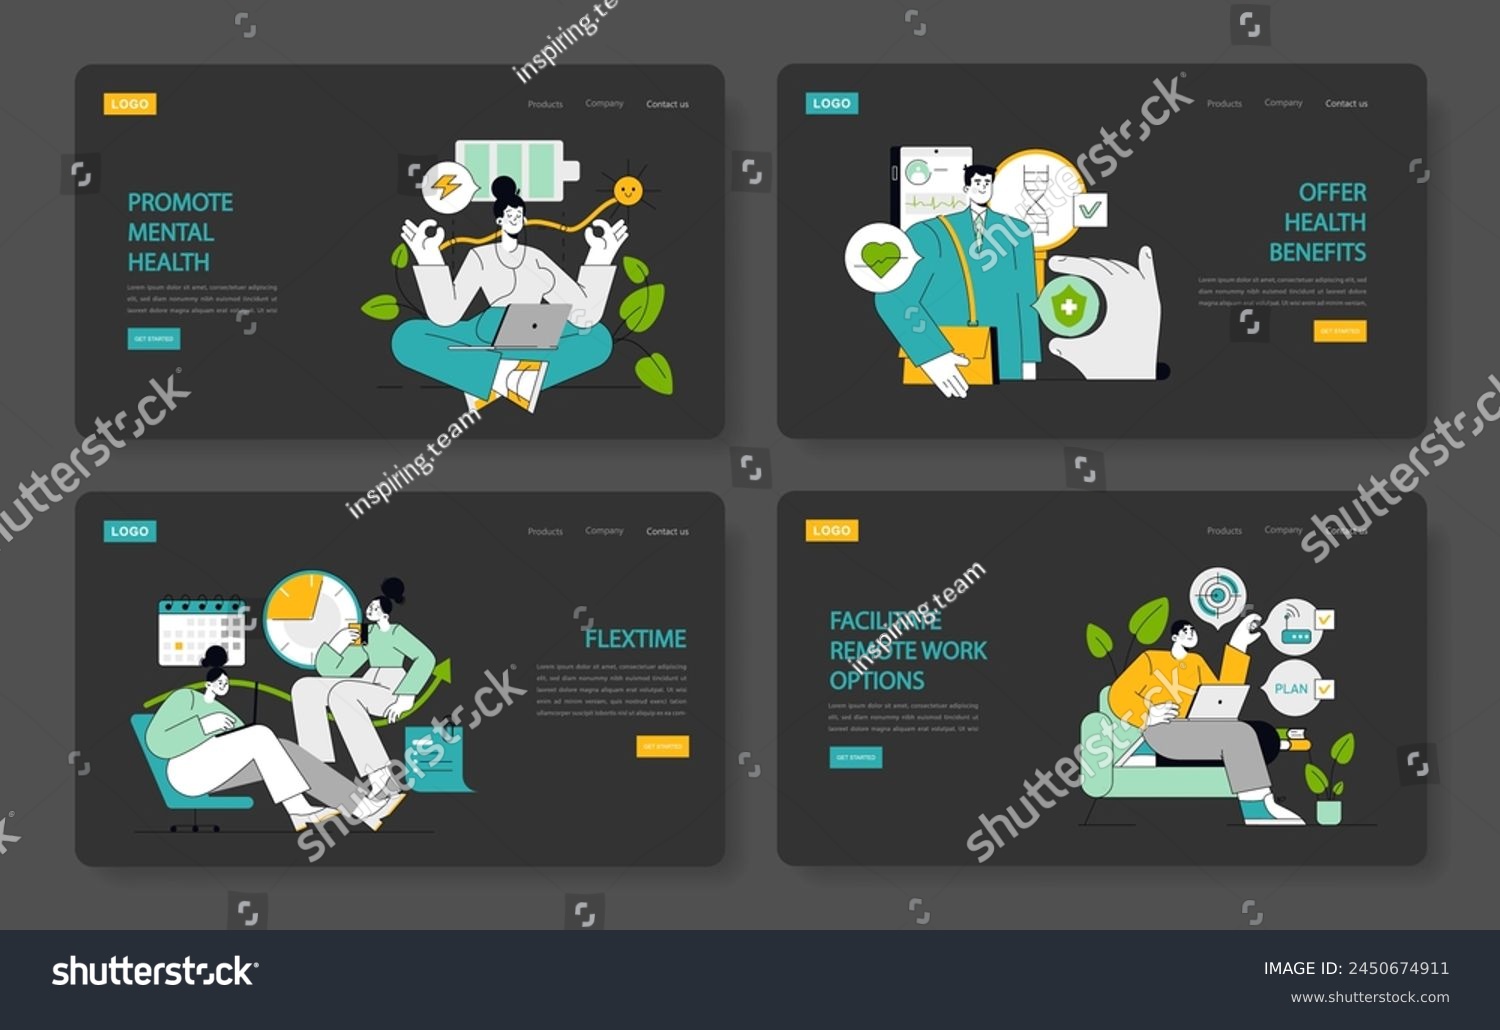 SVG of Employee Well-being concept. Showcases mental health support, comprehensive health benefits, work-life balance through flextime, and remote working solutions. Vector illustration svg